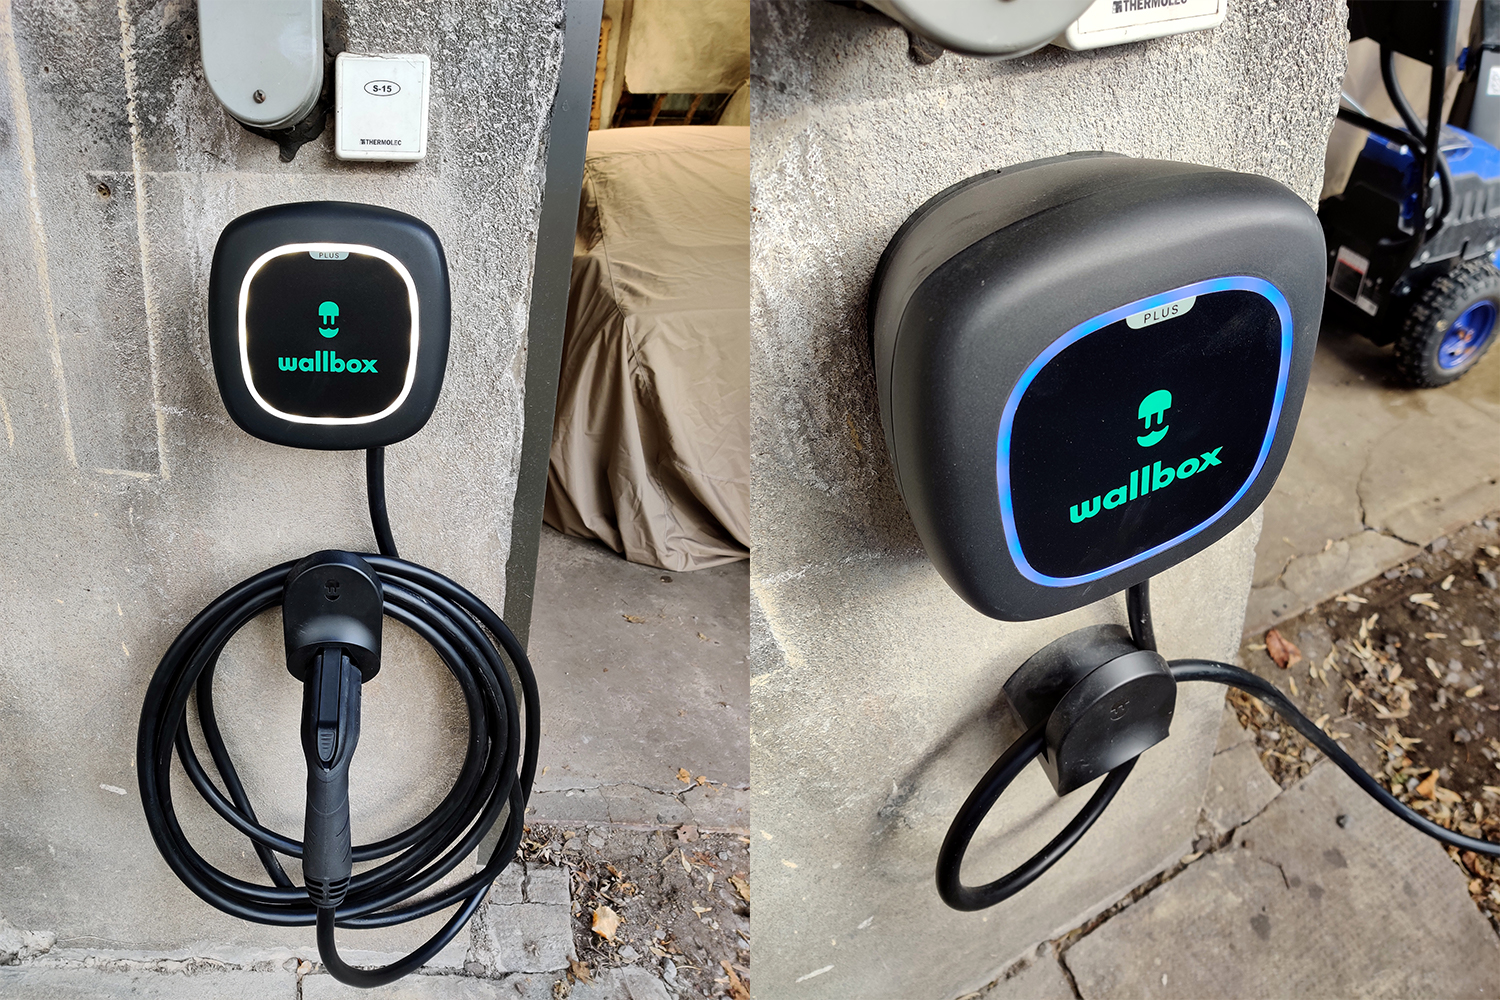 Wallbox Pulsar Plus Level 2 Electric Vehicle Smart Charger - auto parts -  by owner - vehicle automotive sale 